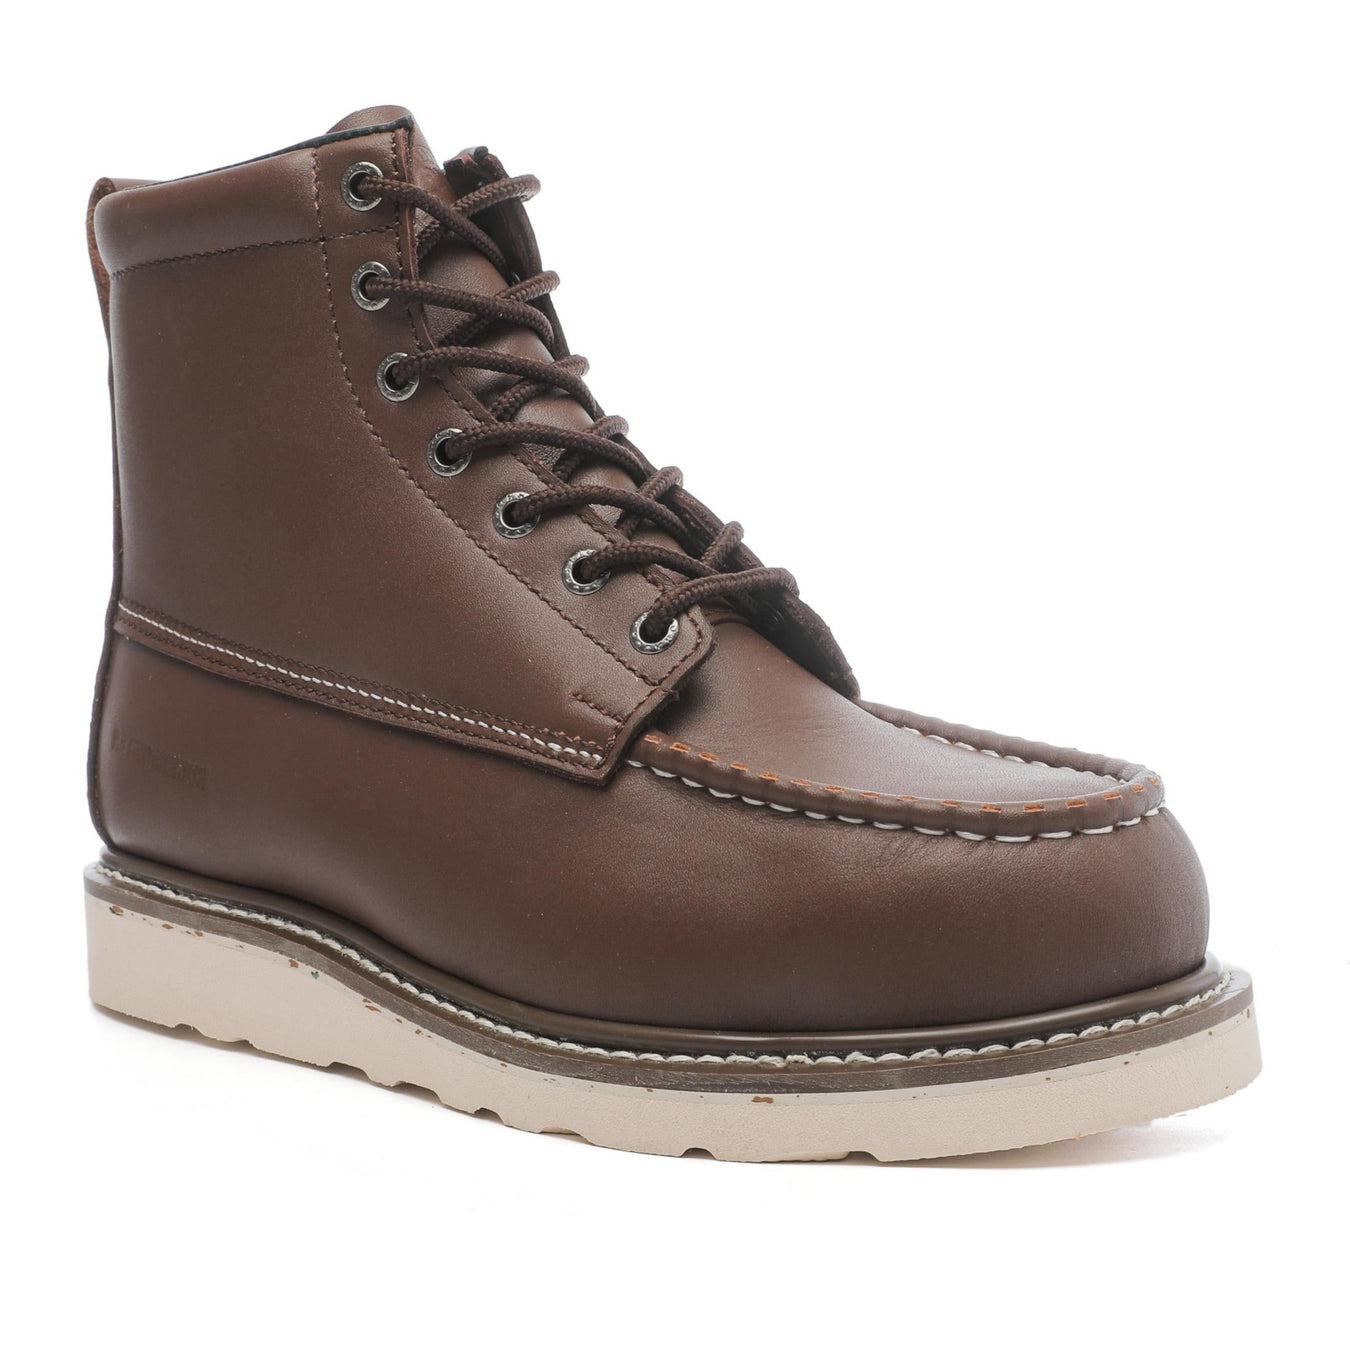 Wedge Sole Work Boots